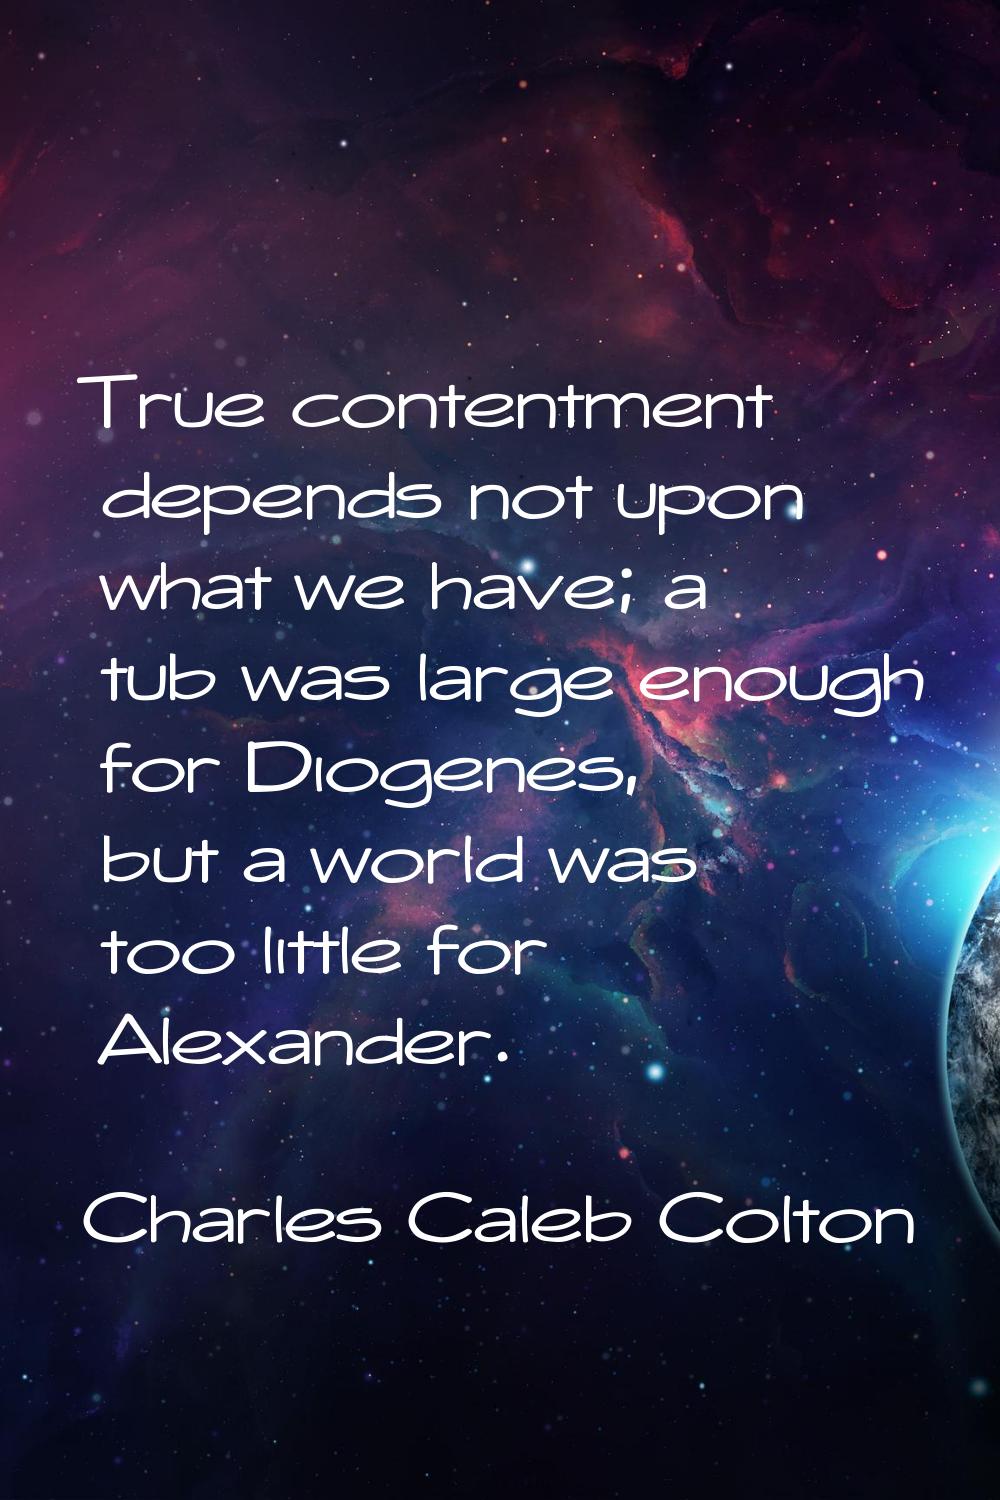 True contentment depends not upon what we have; a tub was large enough for Diogenes, but a world wa